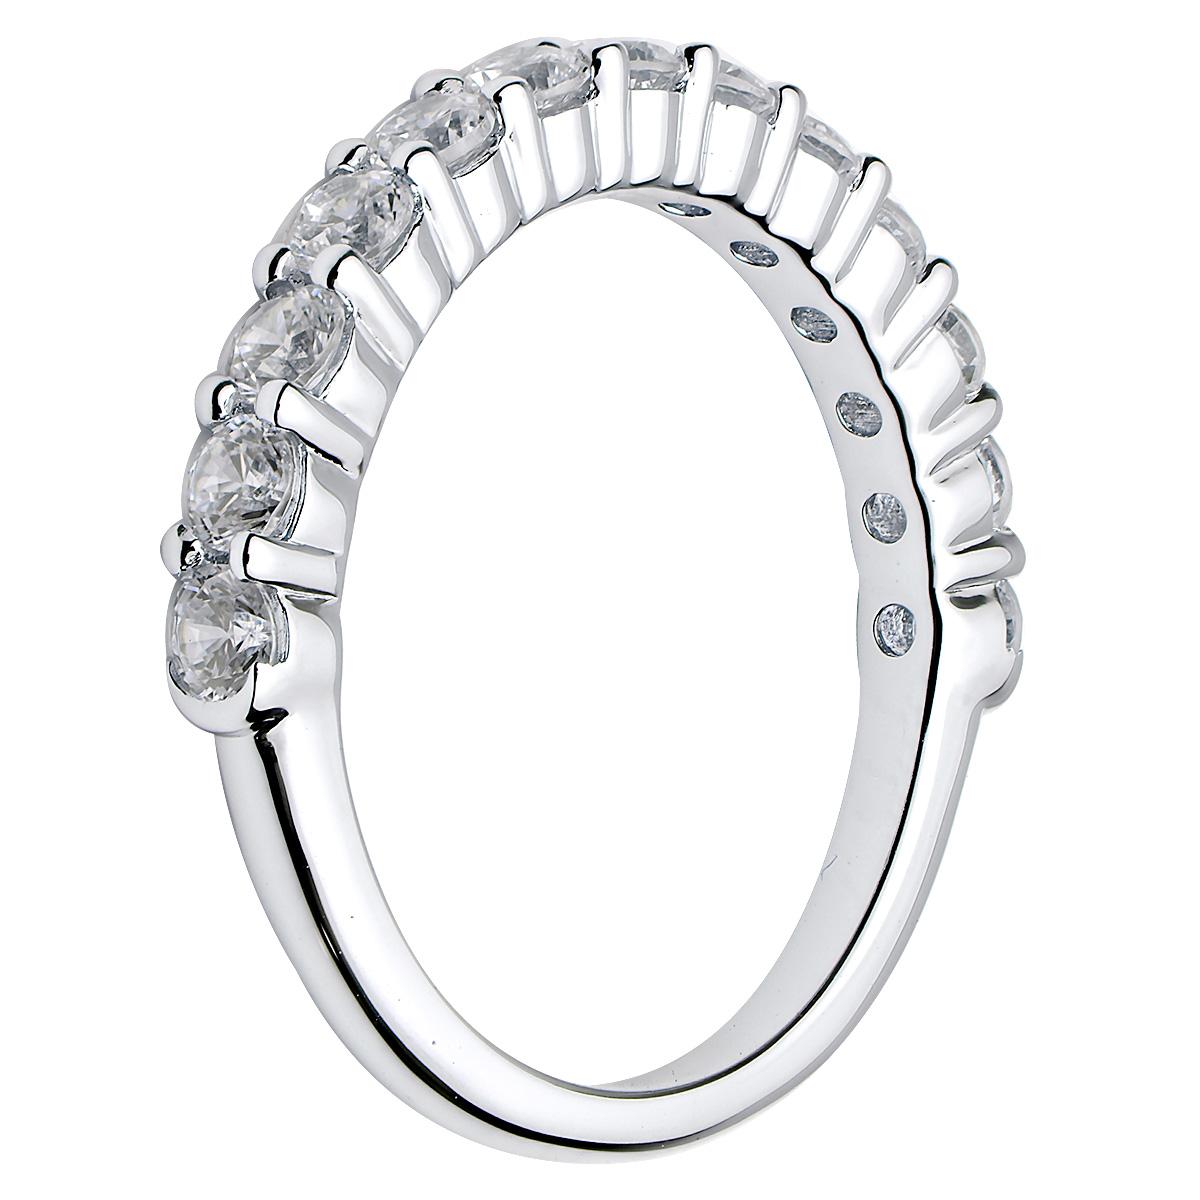 This beautiful 18 karat white gold diamond ring is made from 2.9 grams of gold. There are 13 round VS2, G color diamonds totaling 0.92 carats which are stunningly set with unique side prong details. This ring is size 7.